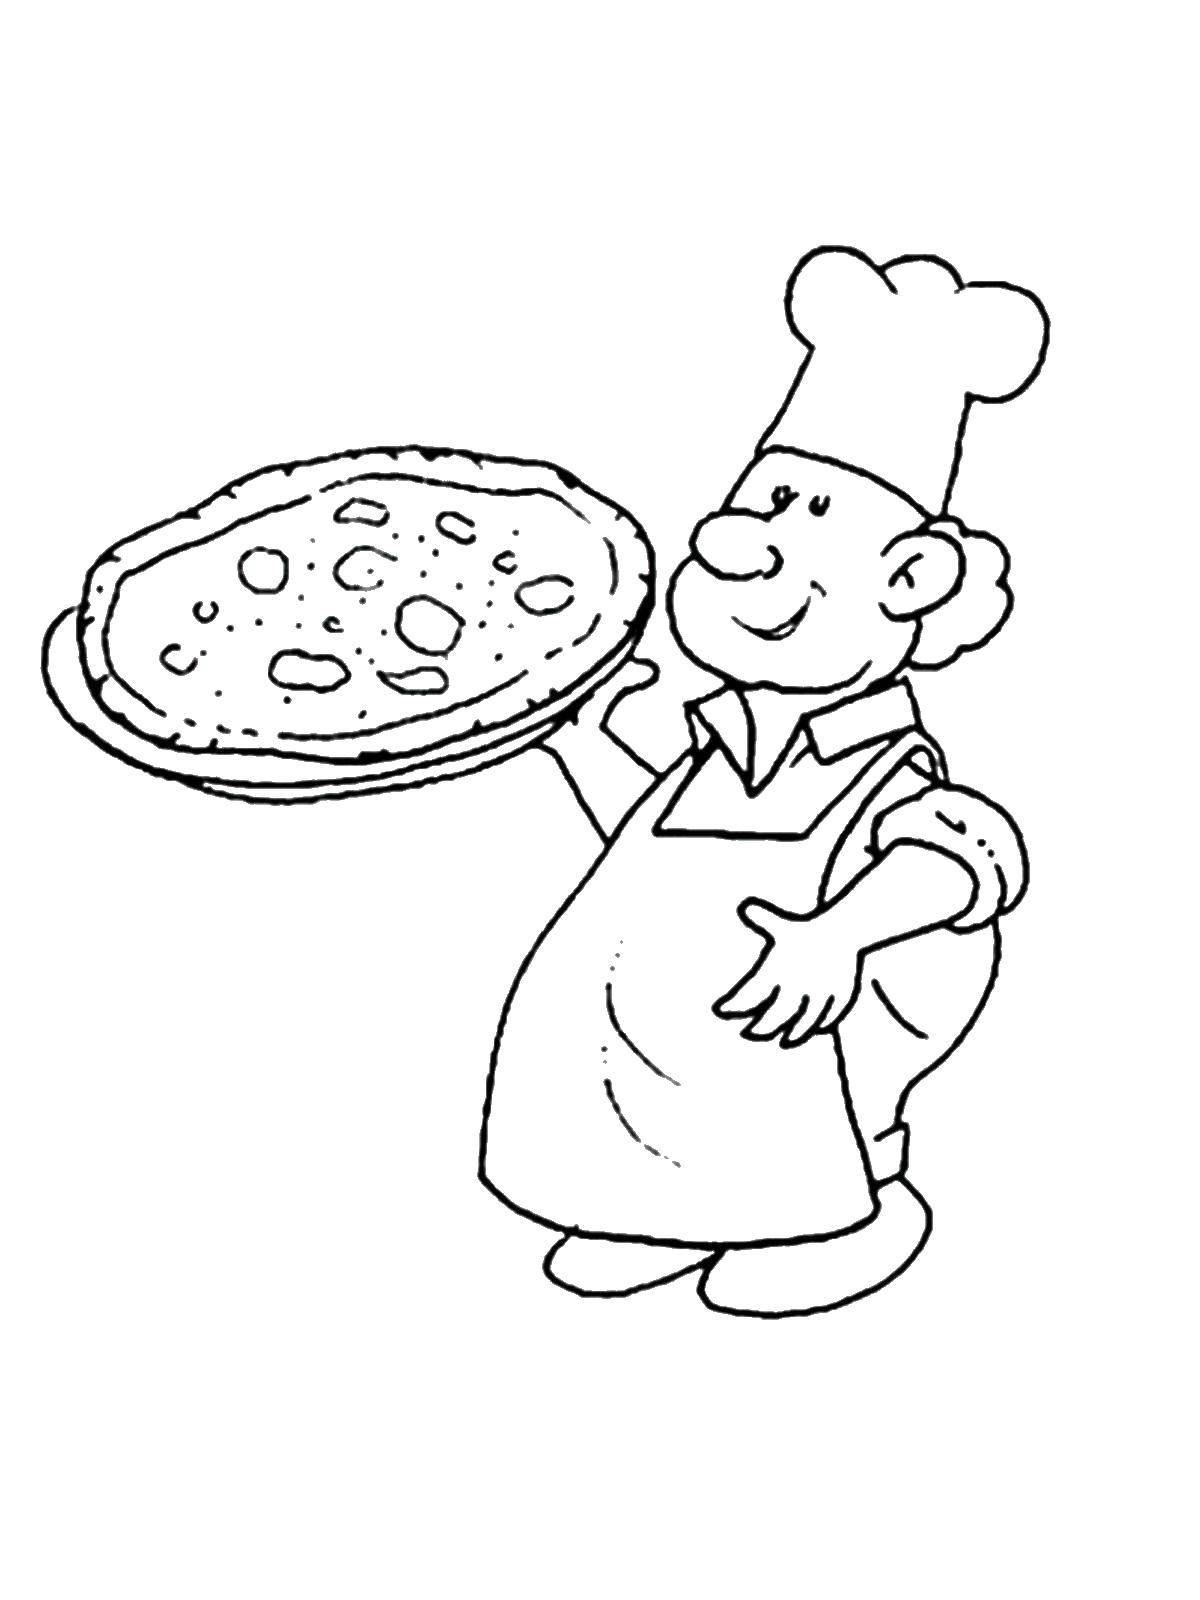 Coloring Cook pizza. Category a profession. Tags:  profession, chef, pizza.